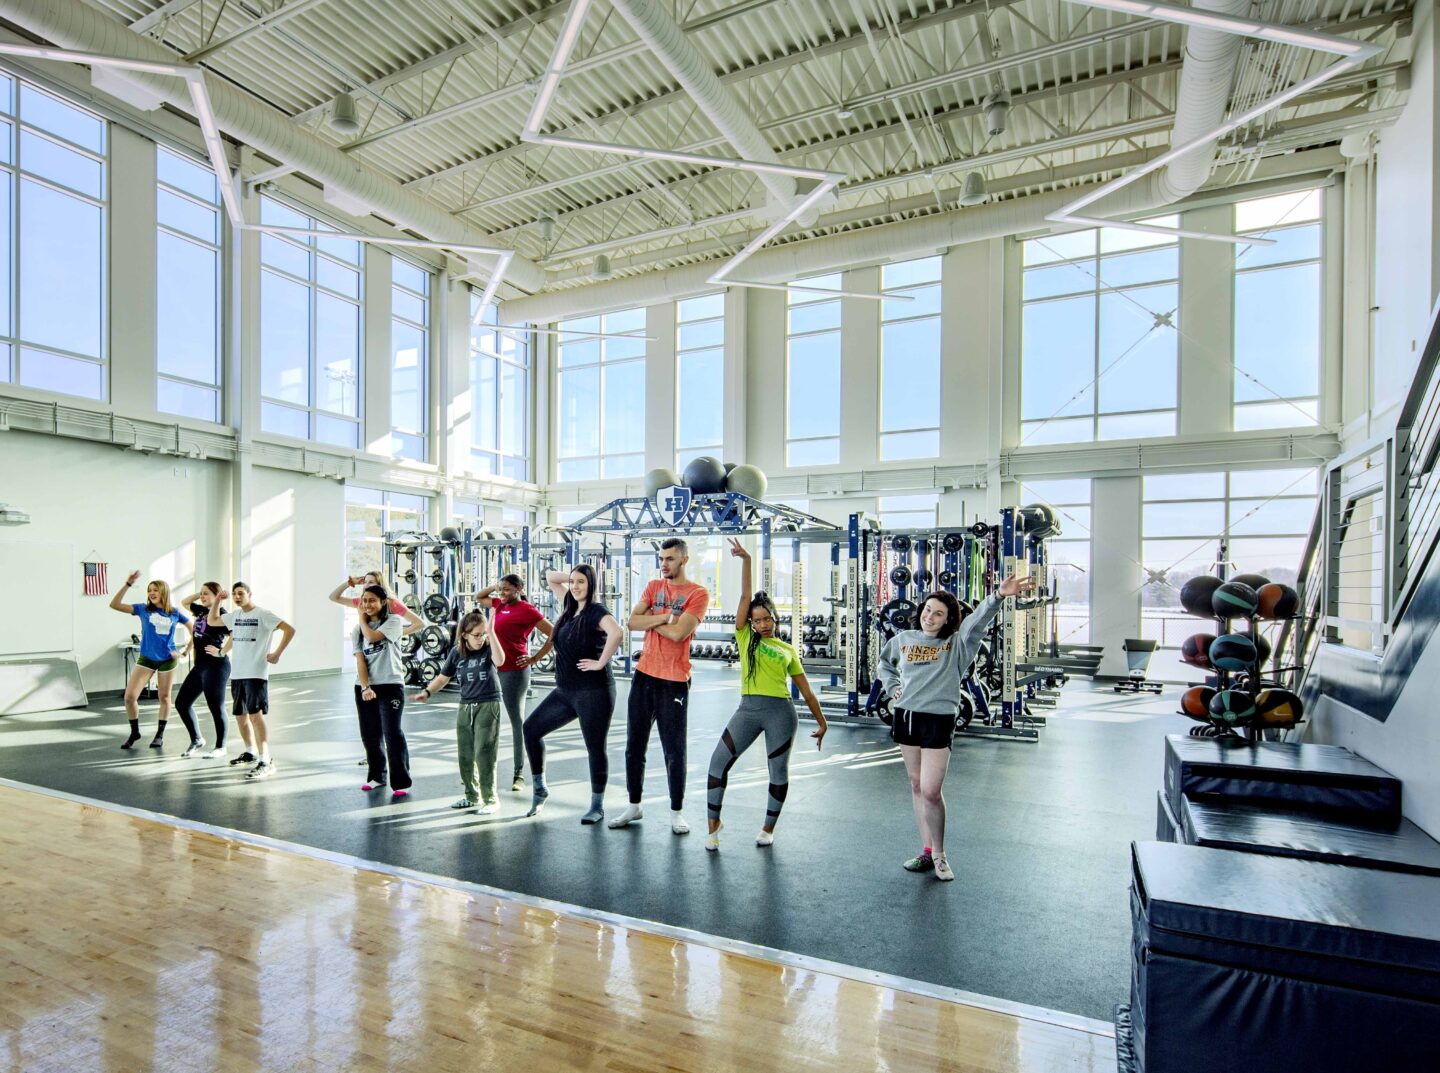 Students pose in the fitness center with a view of the space's large windows in the background